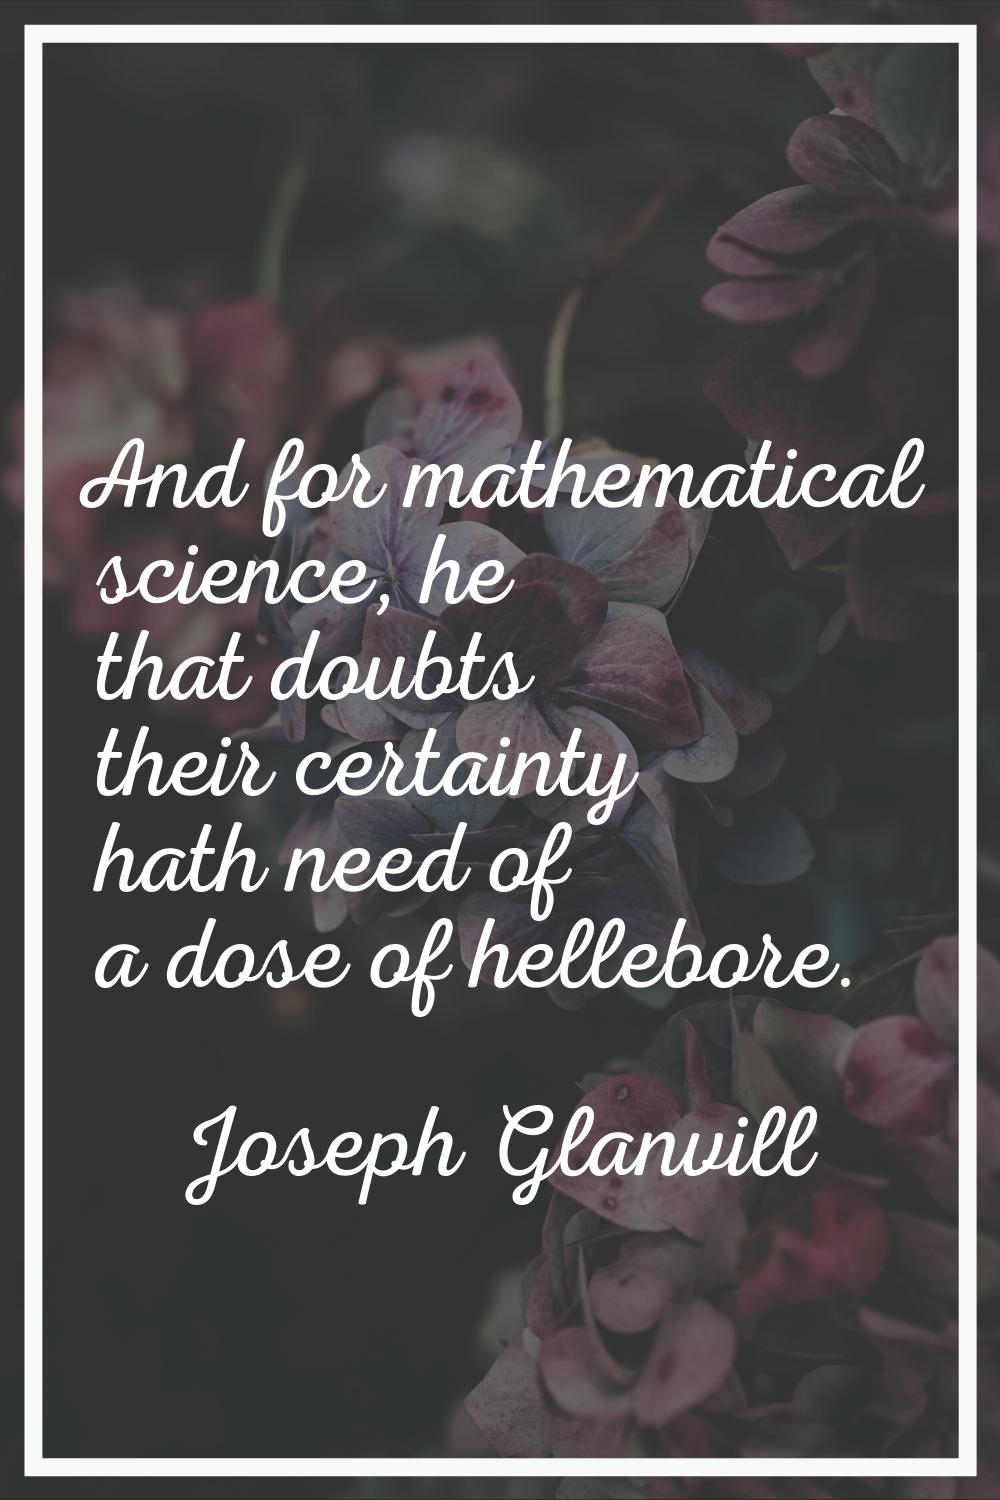 And for mathematical science, he that doubts their certainty hath need of a dose of hellebore.